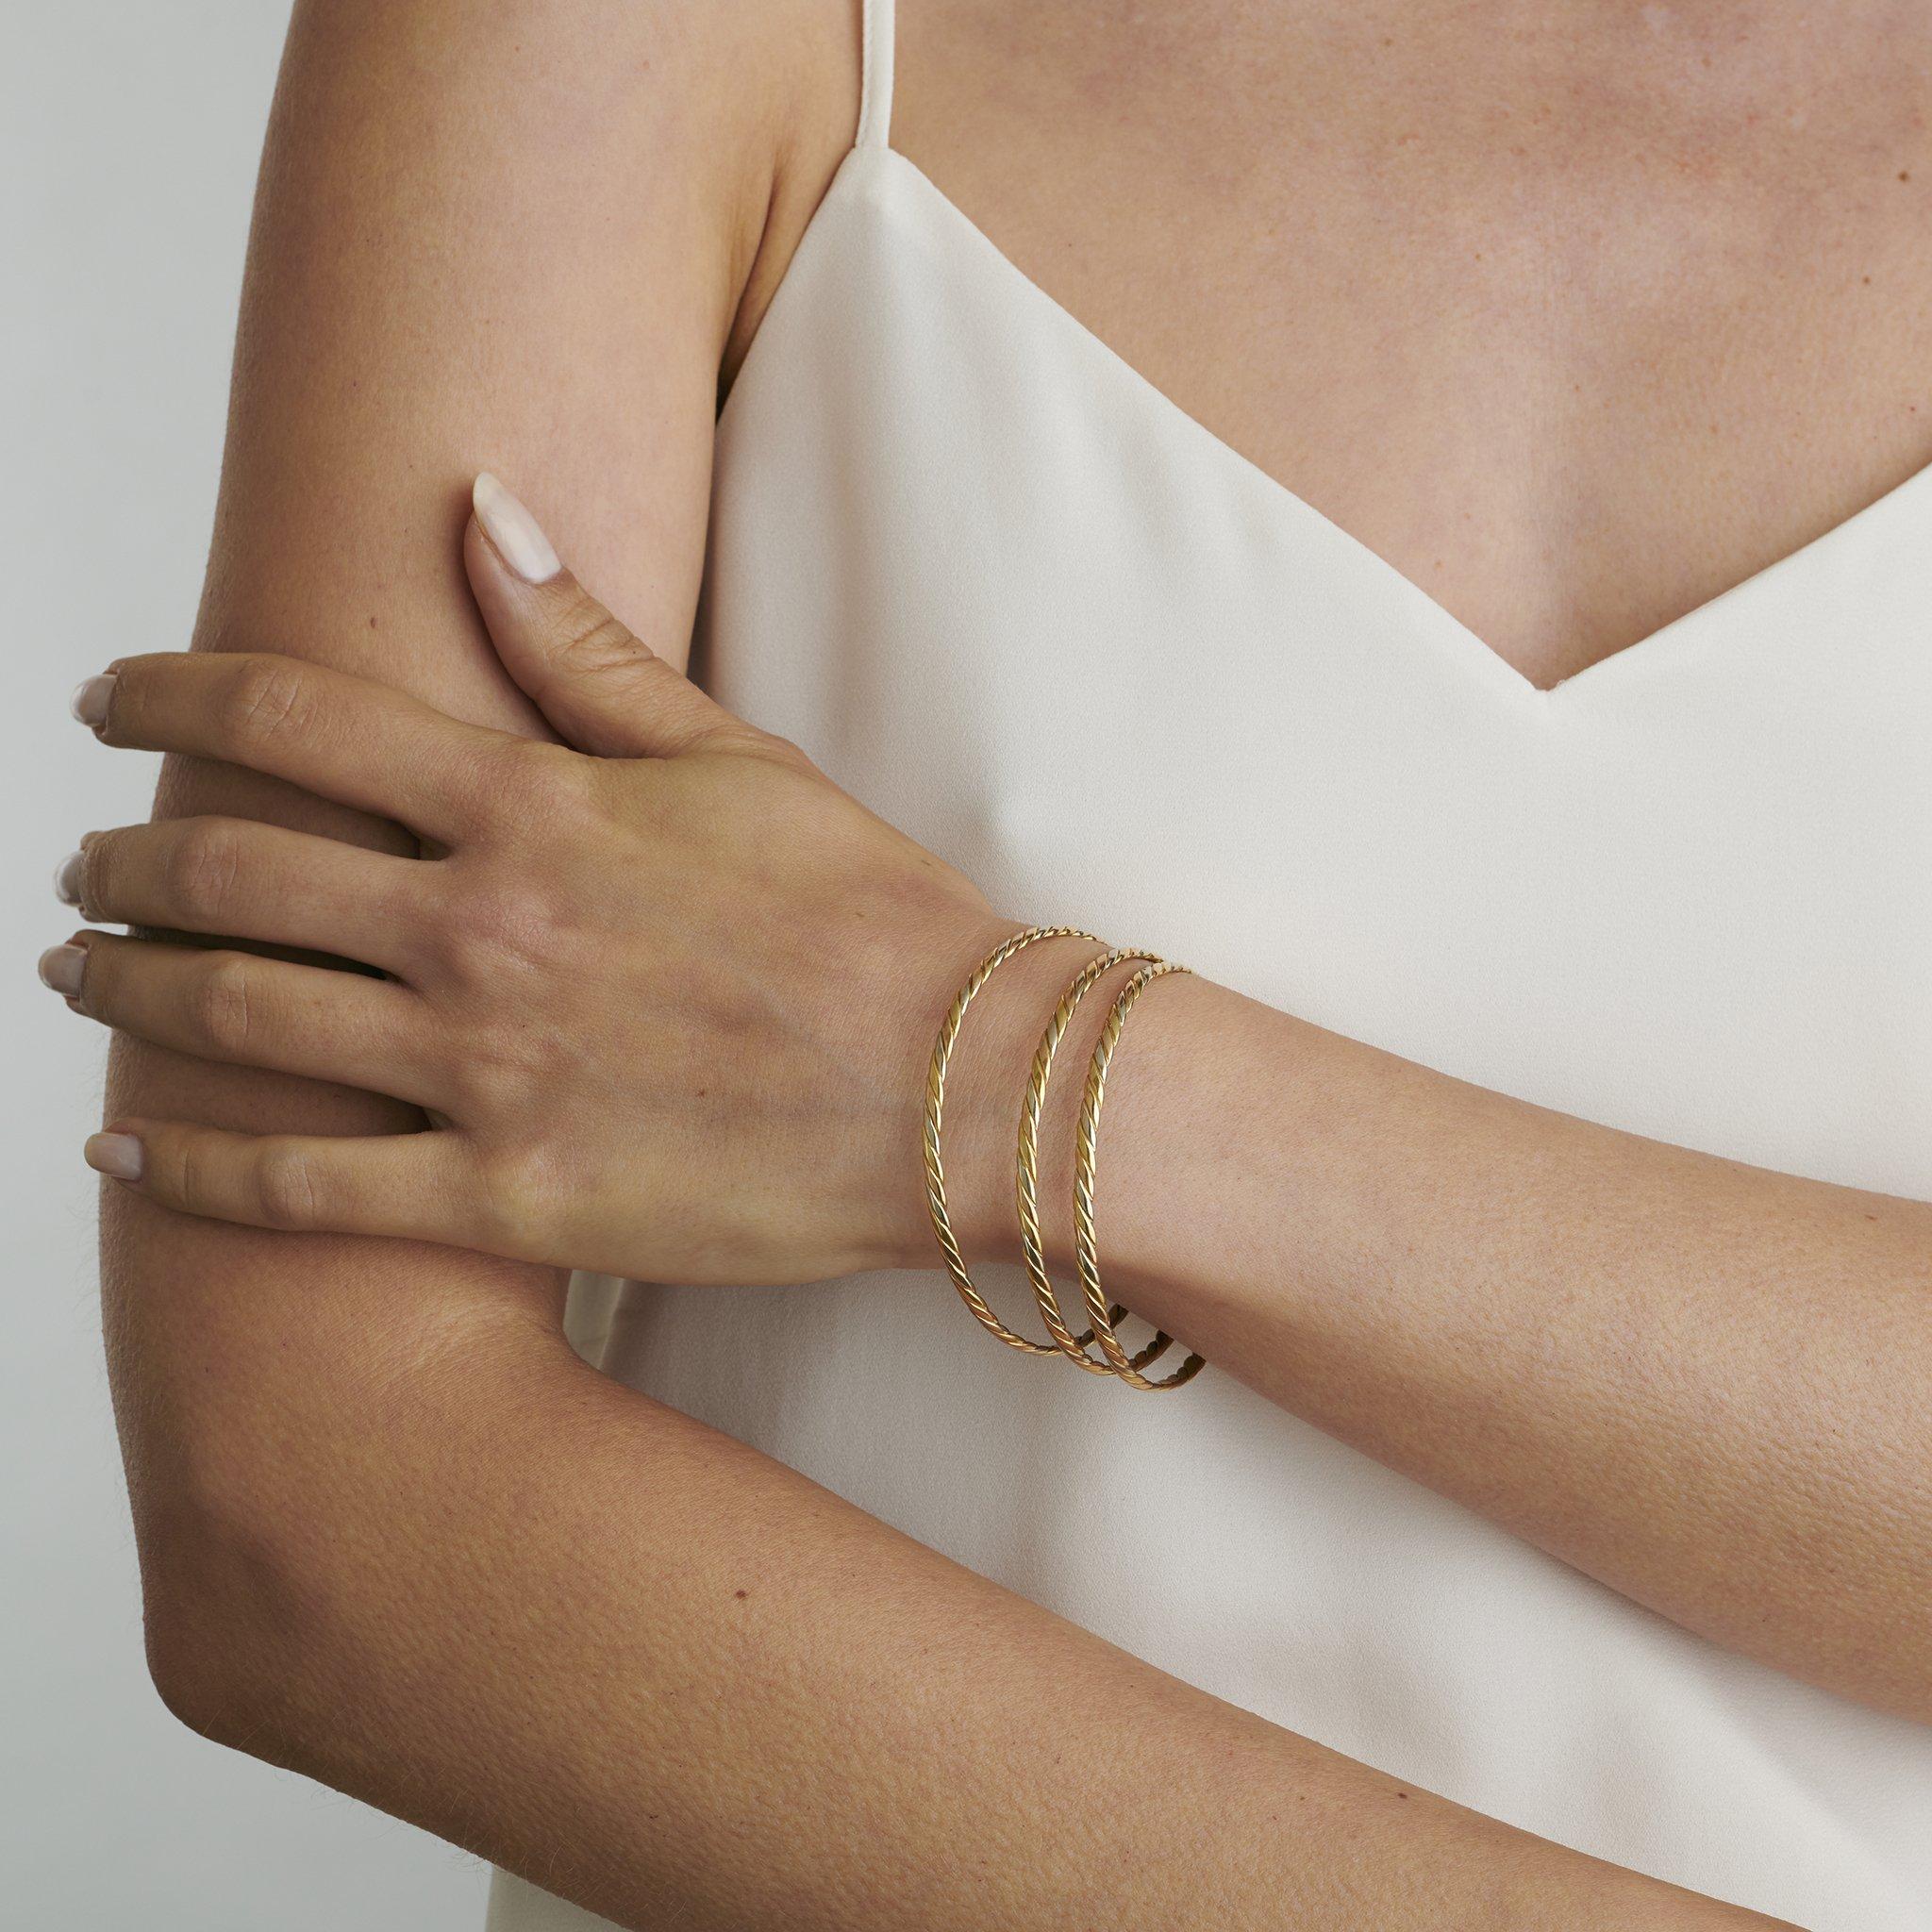 Dating from the 1970s, this trio of bracelets is composed of tri-color gold. The set of three identical narrow bangles follows a repeating yellow, white, and rose-gold ropetwist design. With their refined French workmanship, these fun 1970s